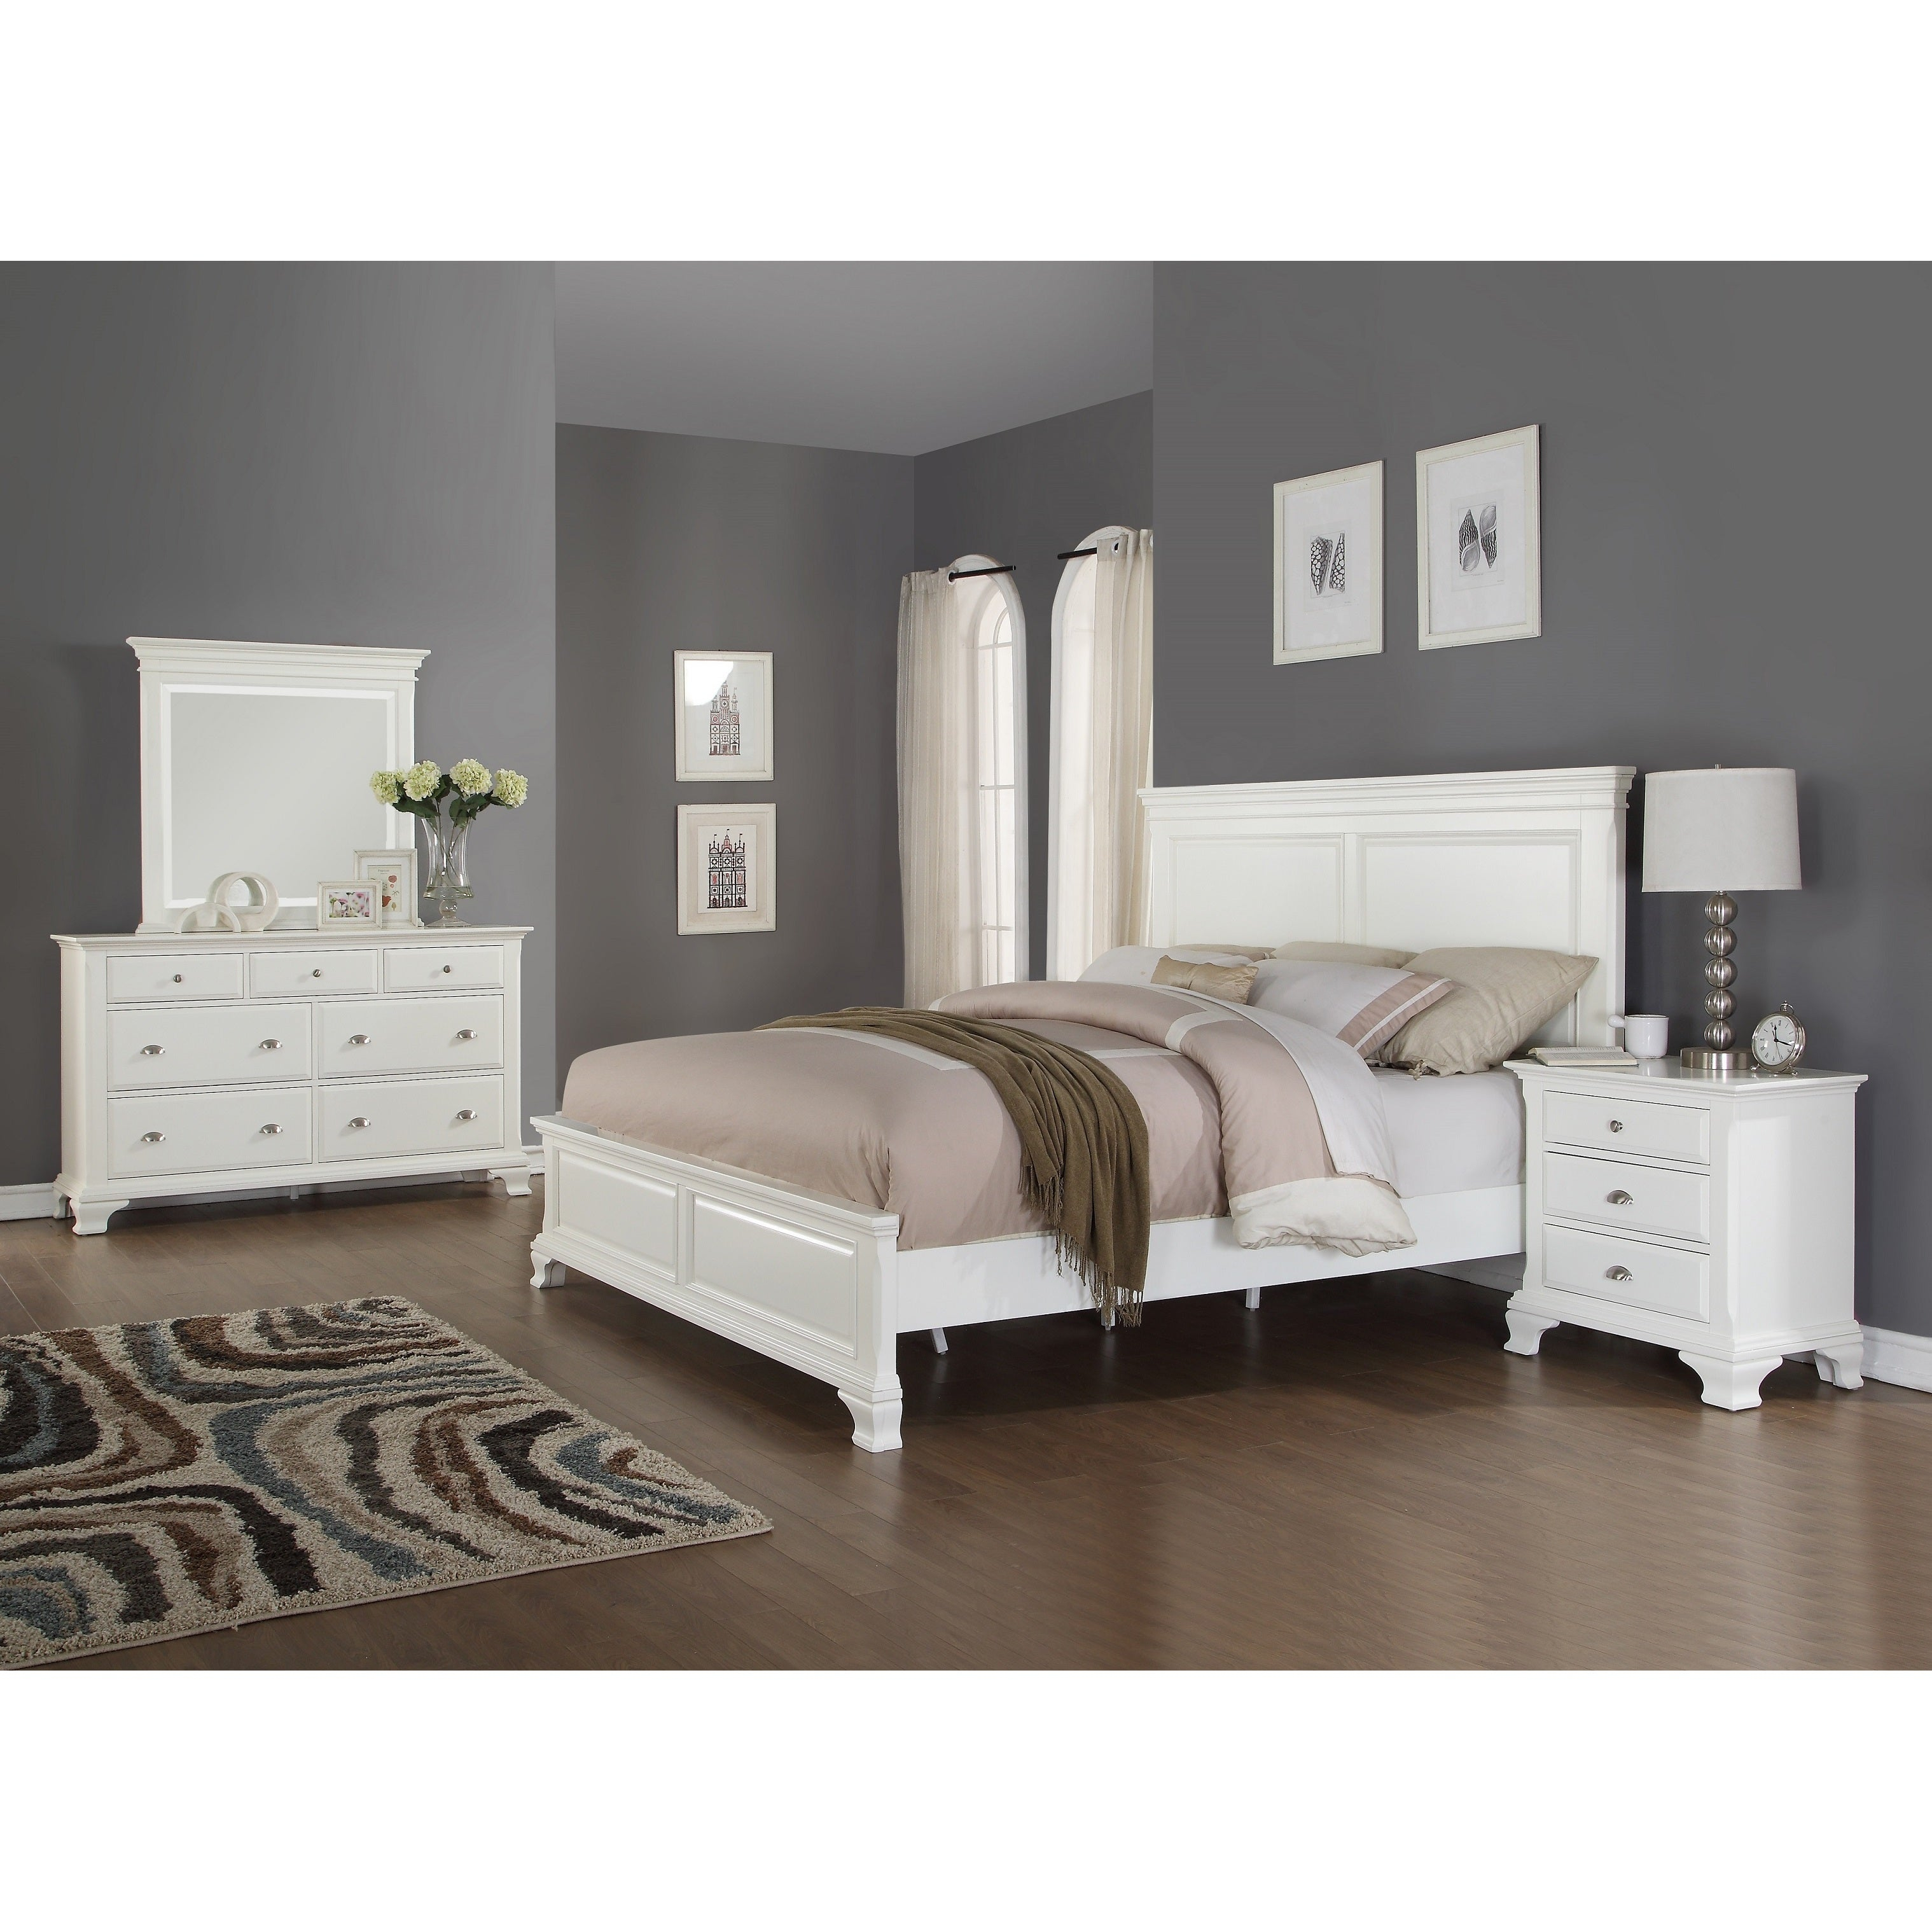 Laveno 012 White Wood Bedroom Furniture Set Includes Queen Bed Dresser Mirror And Night Stand with regard to size 3037 X 3037